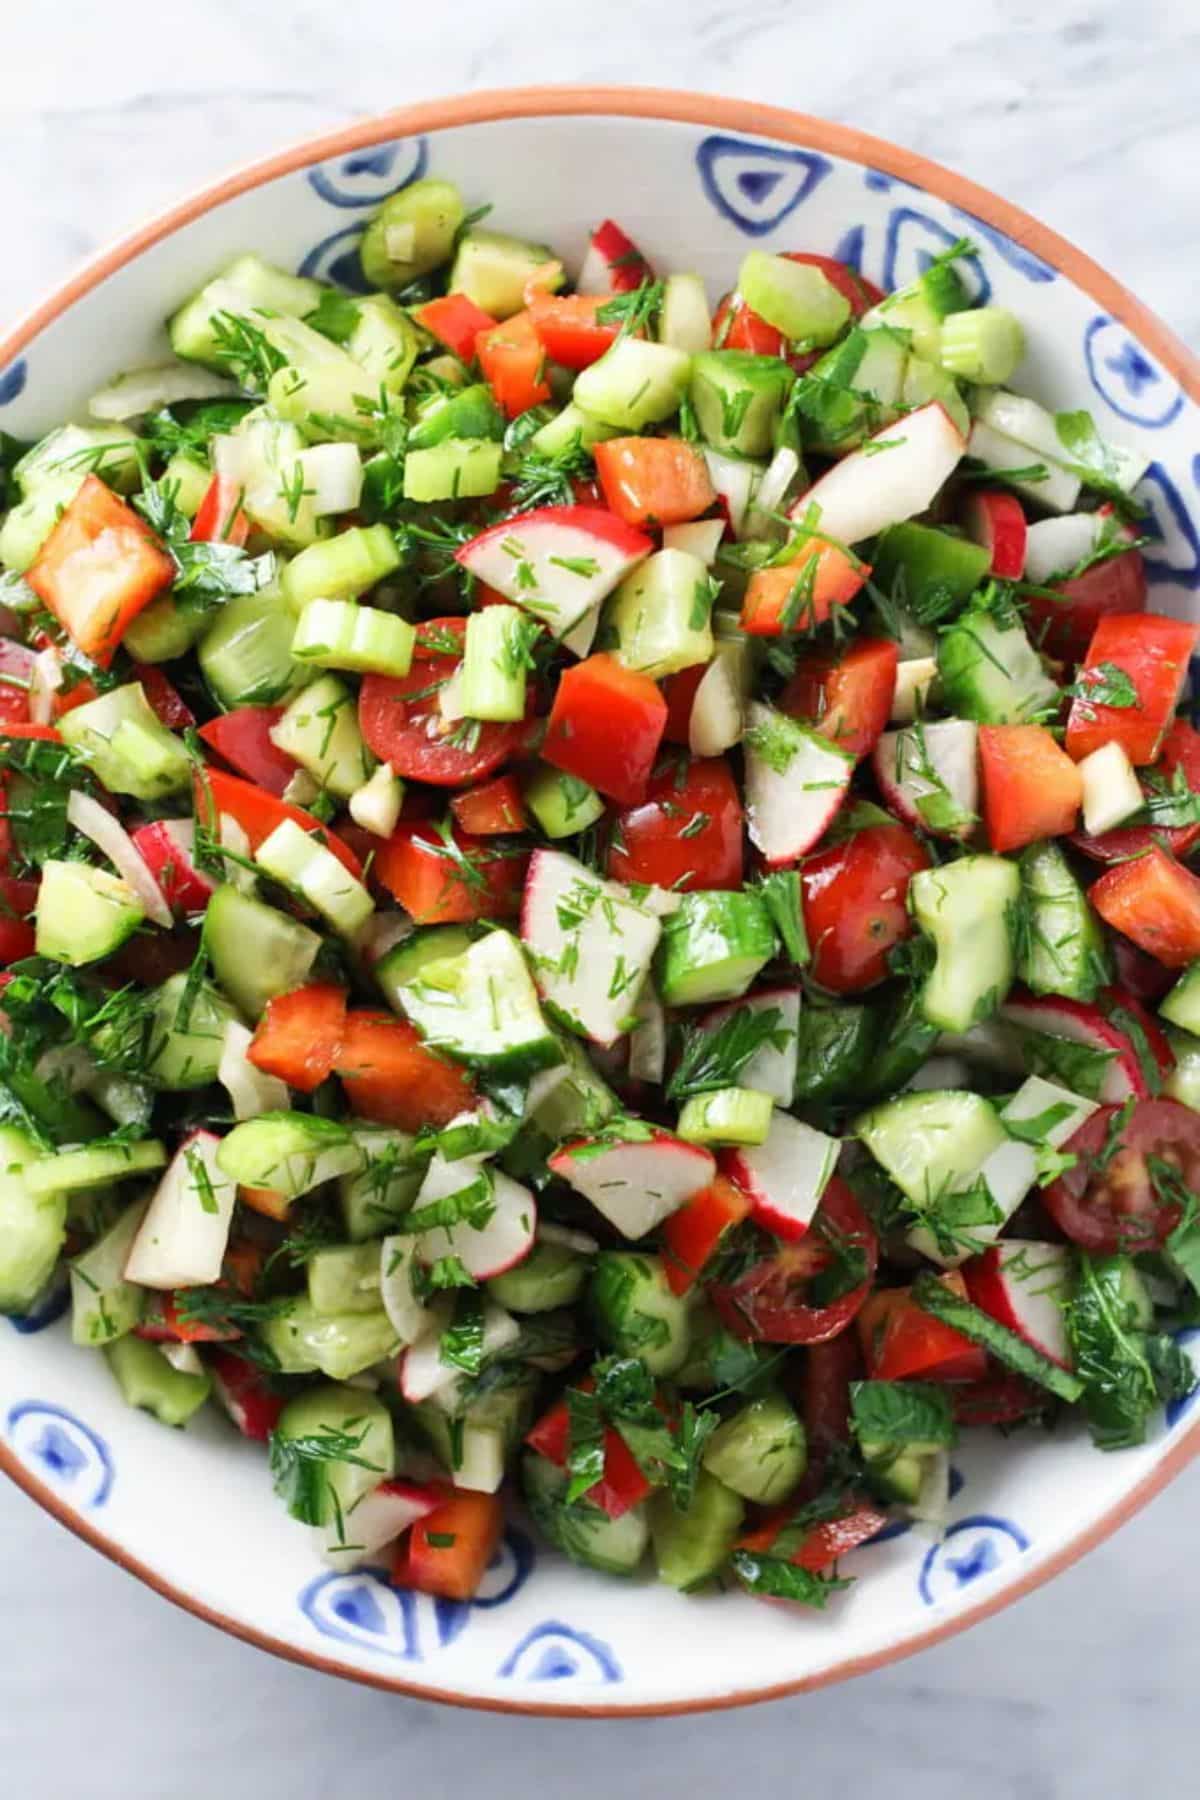 Healthy fresh vegetable salad in a bowl.